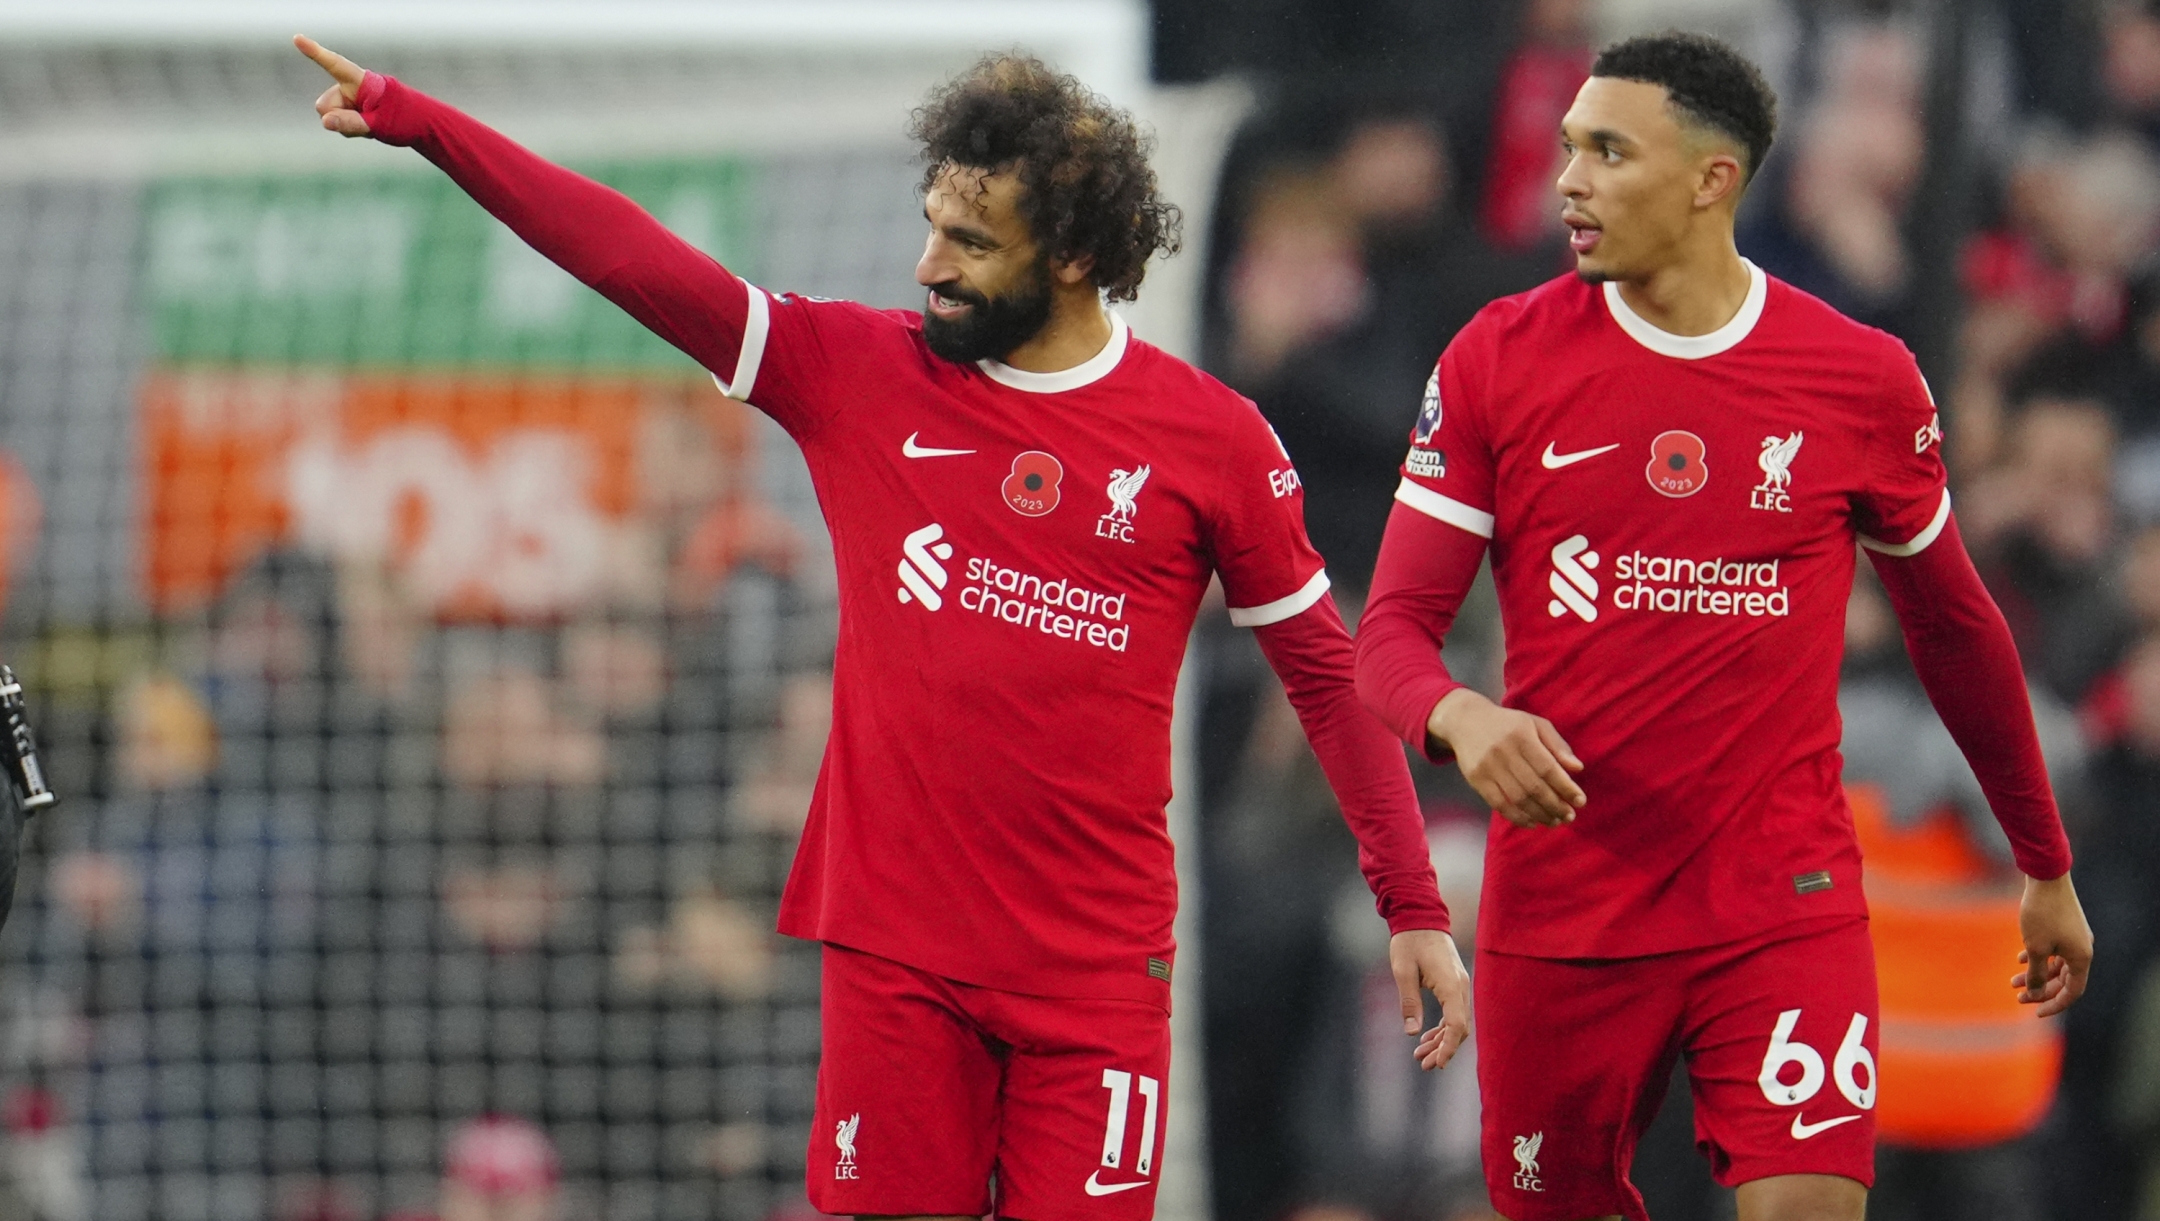 Liverpool's Mohamed Salah, left, celebrates scoring his side's 2nd goal next to teammate Trent Alexander-Arnold during the English Premier League soccer match between Liverpool and Brentford at Anfield stadium in Liverpool, England, Sunday, Nov. 12, 2023. (AP Photo/Jon Super)